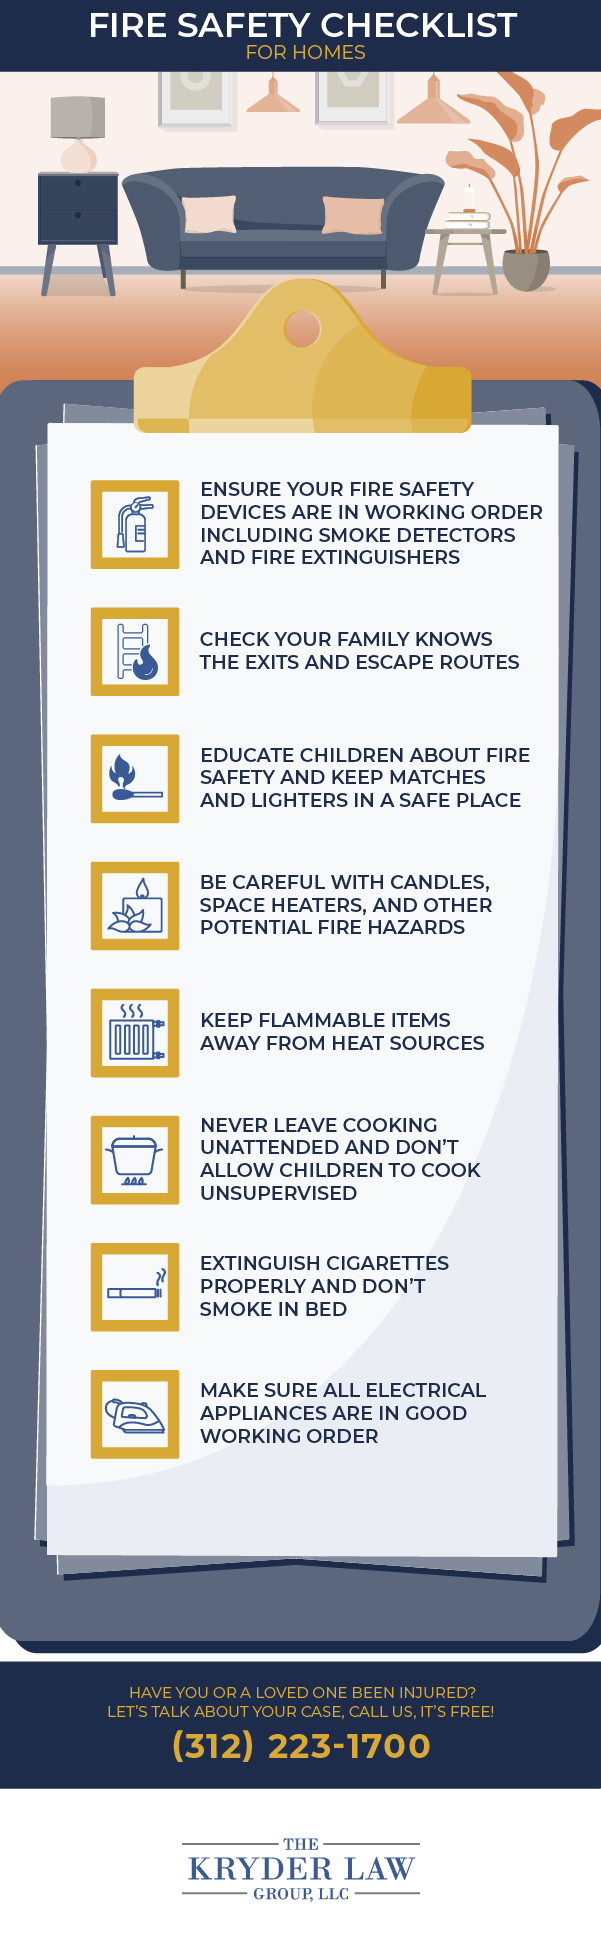 Fire Safety Checklist for Chicago Homes Infographic